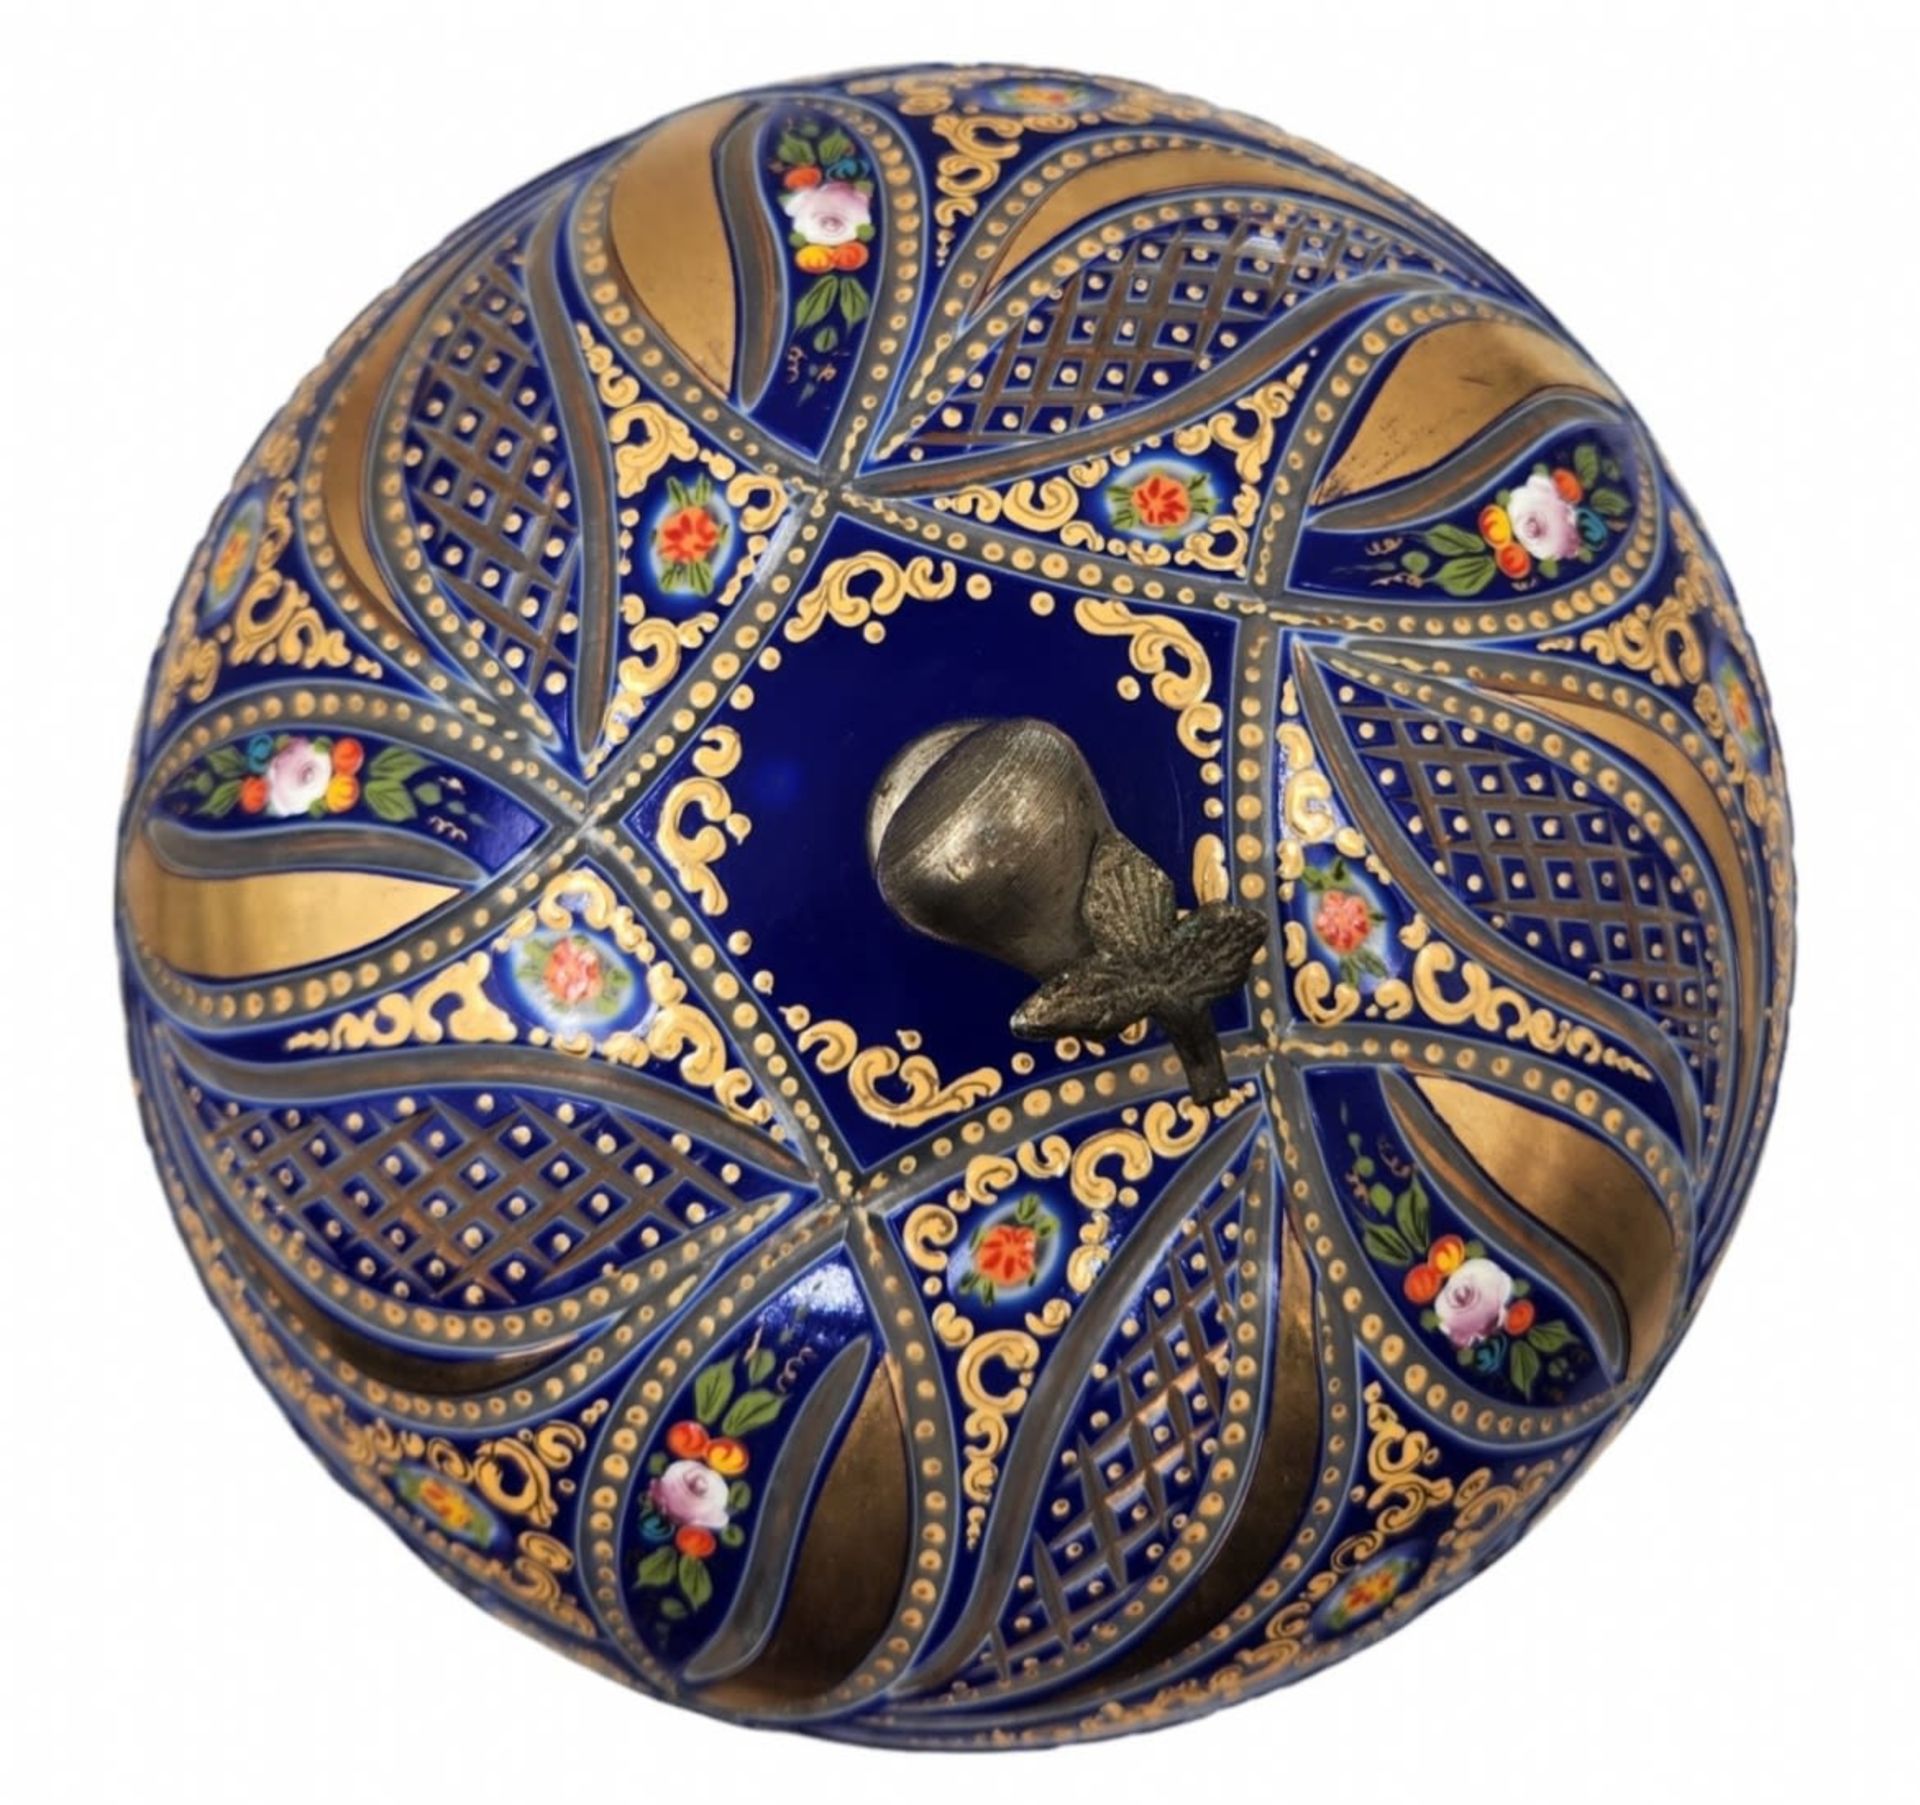 Ancient Bohemian vessel, a very high quality 19th century vessel created for the Ottoman market in - Image 5 of 14